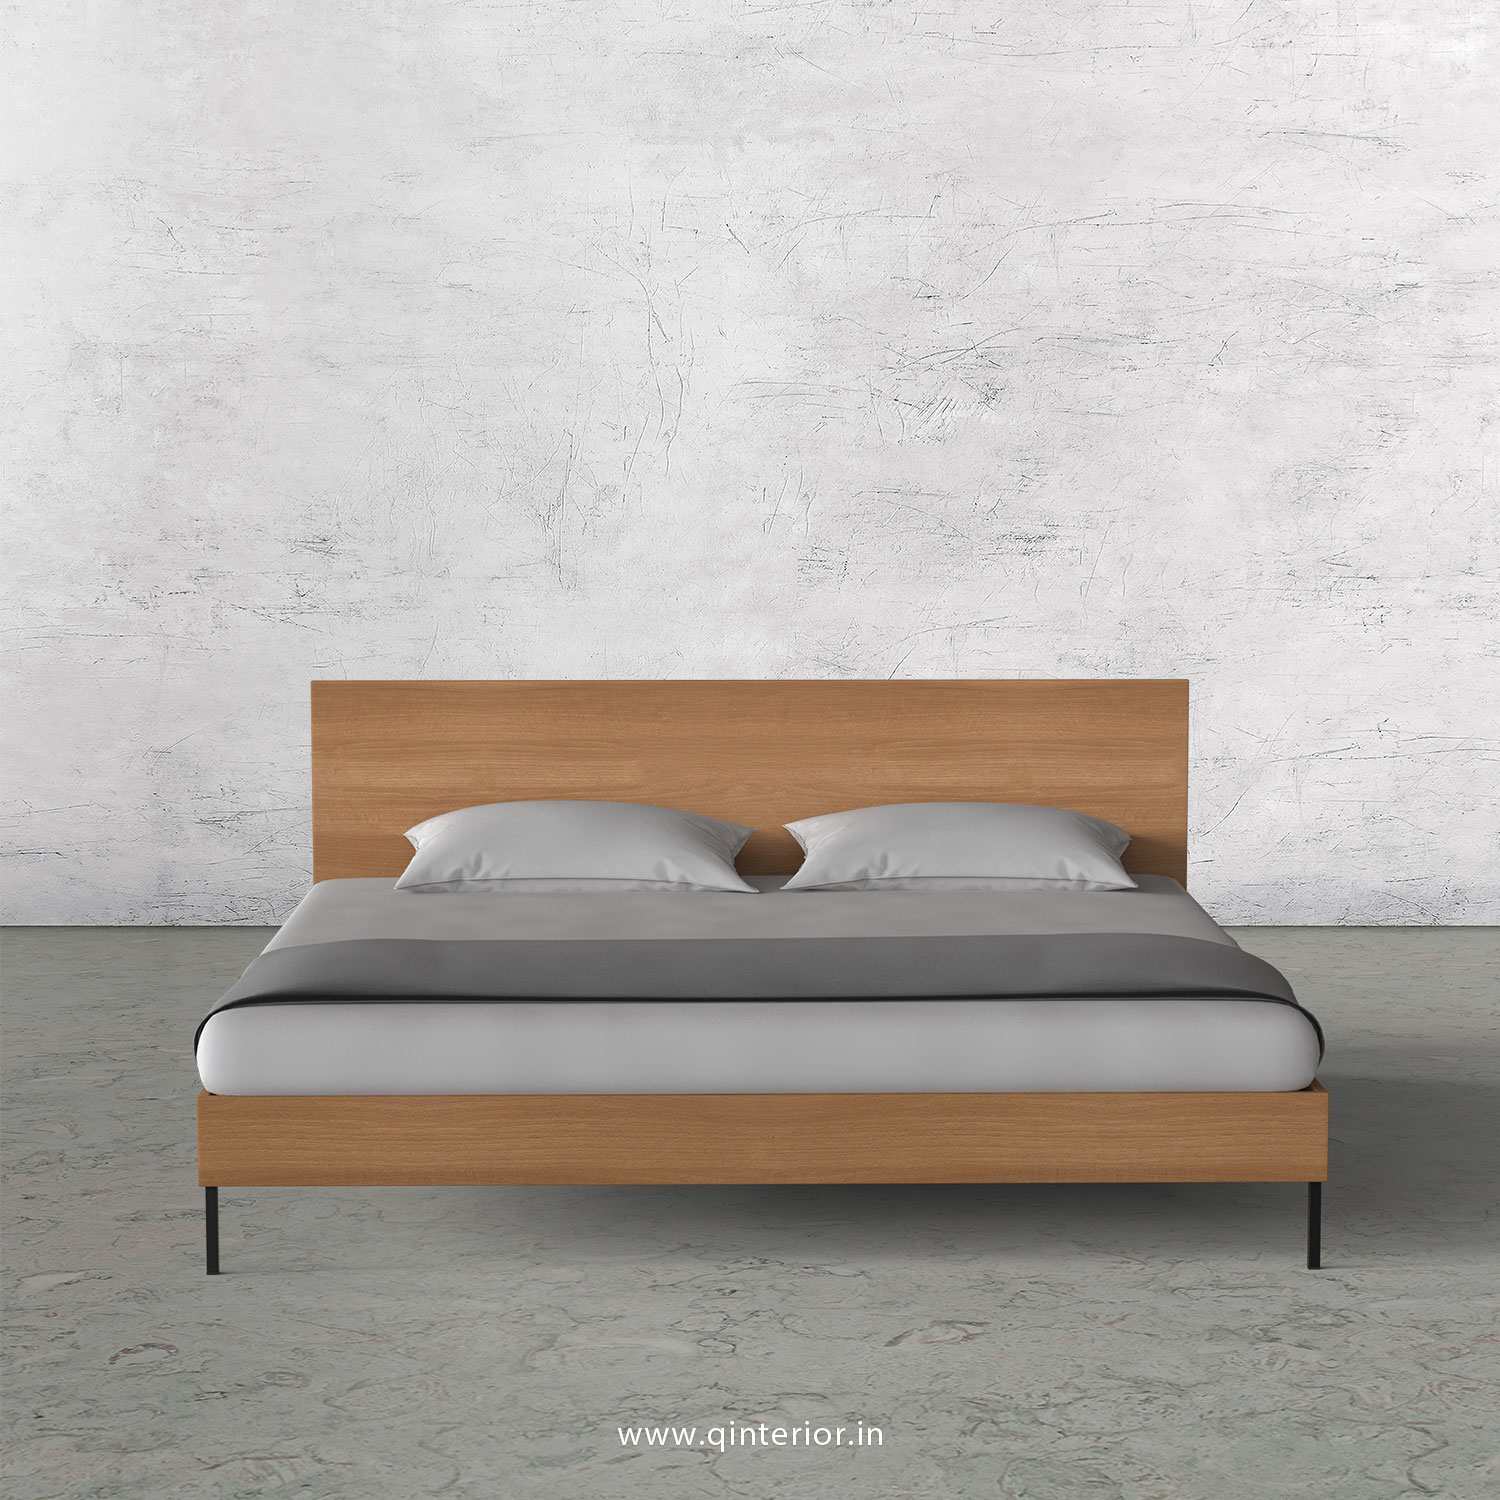 Stable King Size Bed in Oak Finish - KBD105 C2